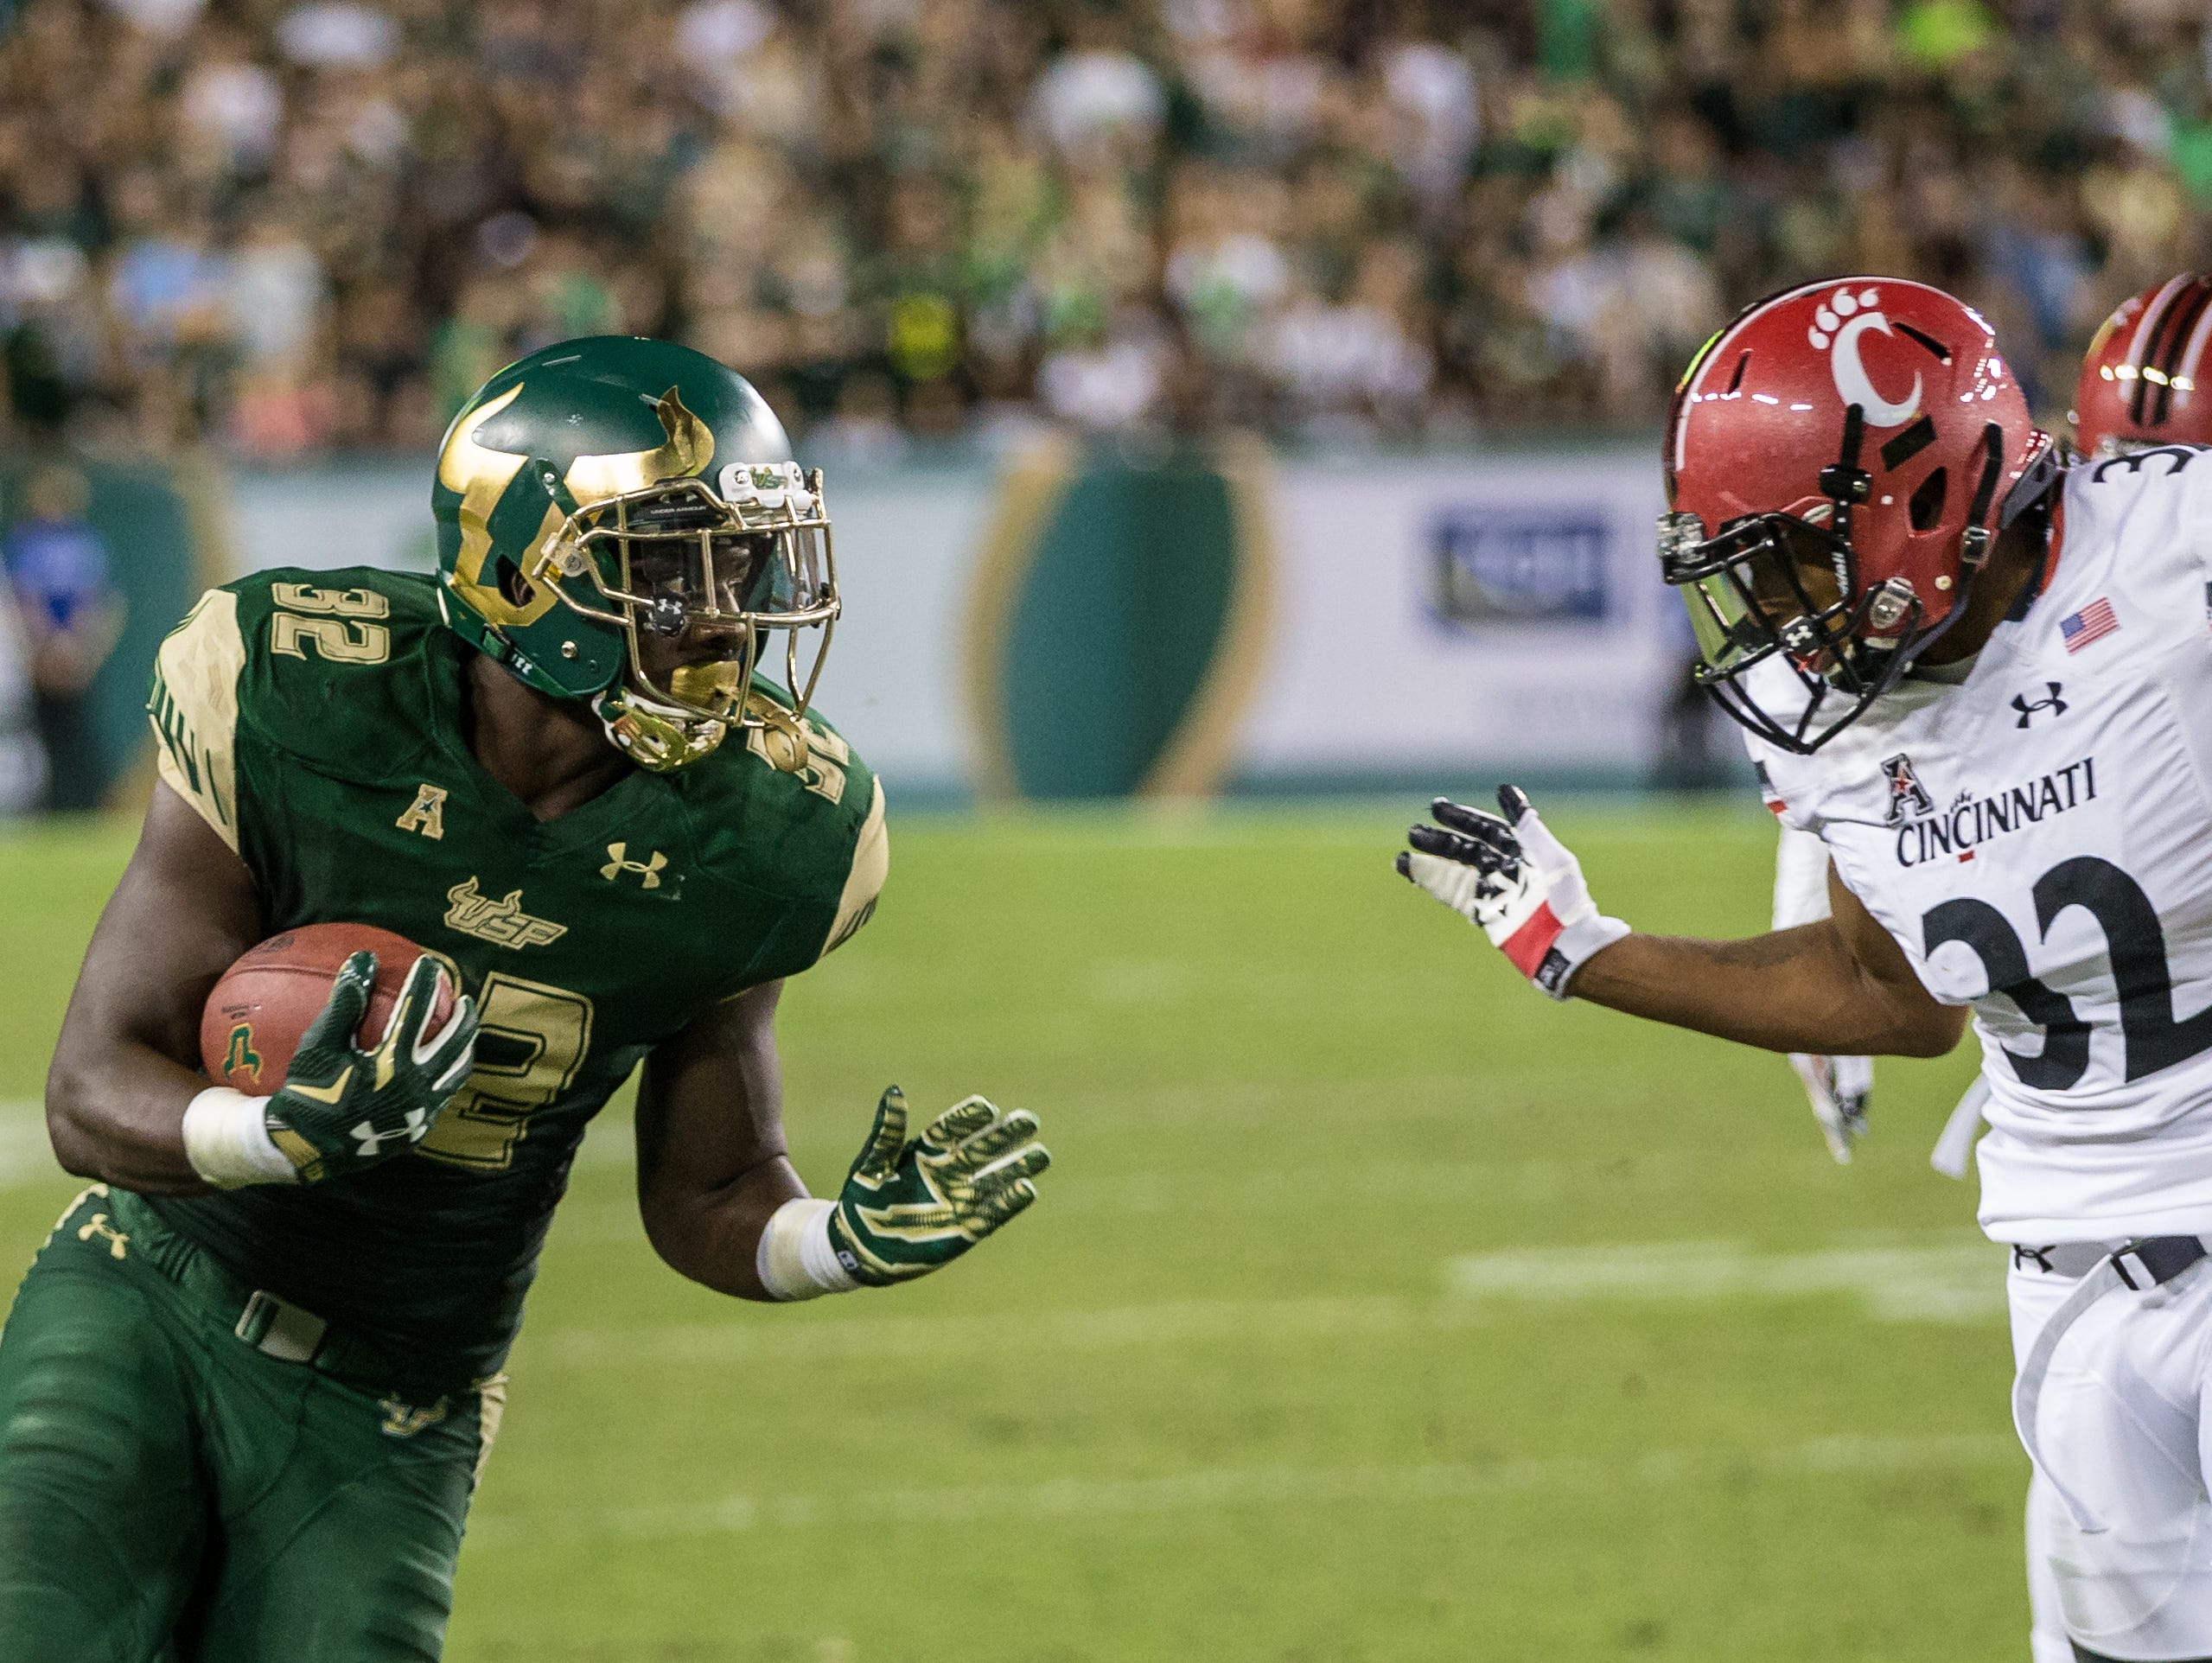 South Florida Bulls running back D'Ernest Johnson carries the ball for a gain during a NCAA football game between the Cincinnati Bearcats and South Florida Bulls at Raymond James Stadium on Friday, November. 20, 2015 in Tampa.